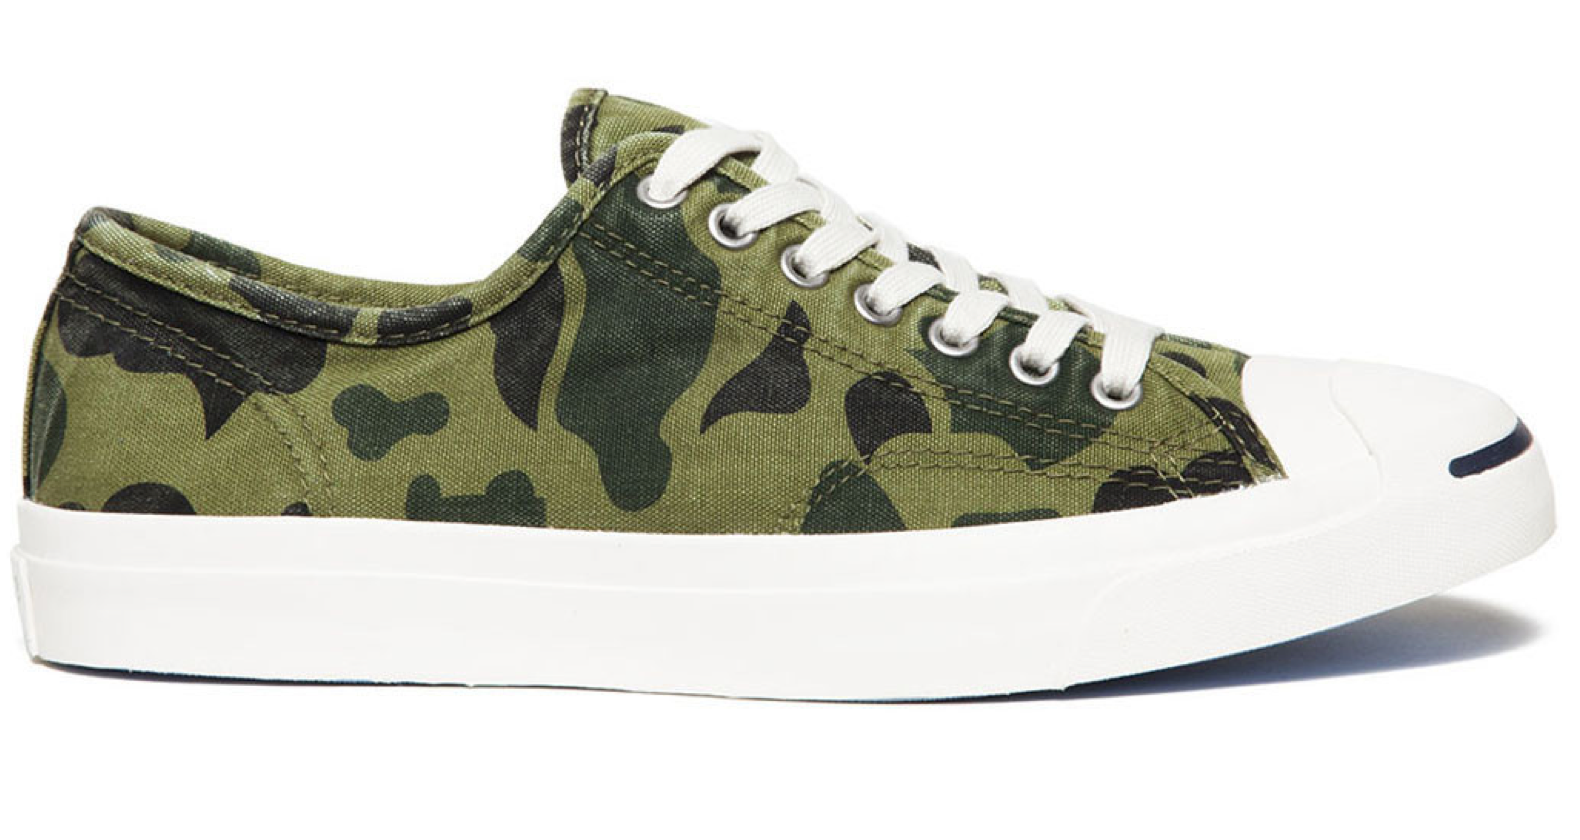 Converse Jack Purcell LLT OX Wash Camo ‘Olive Branch’